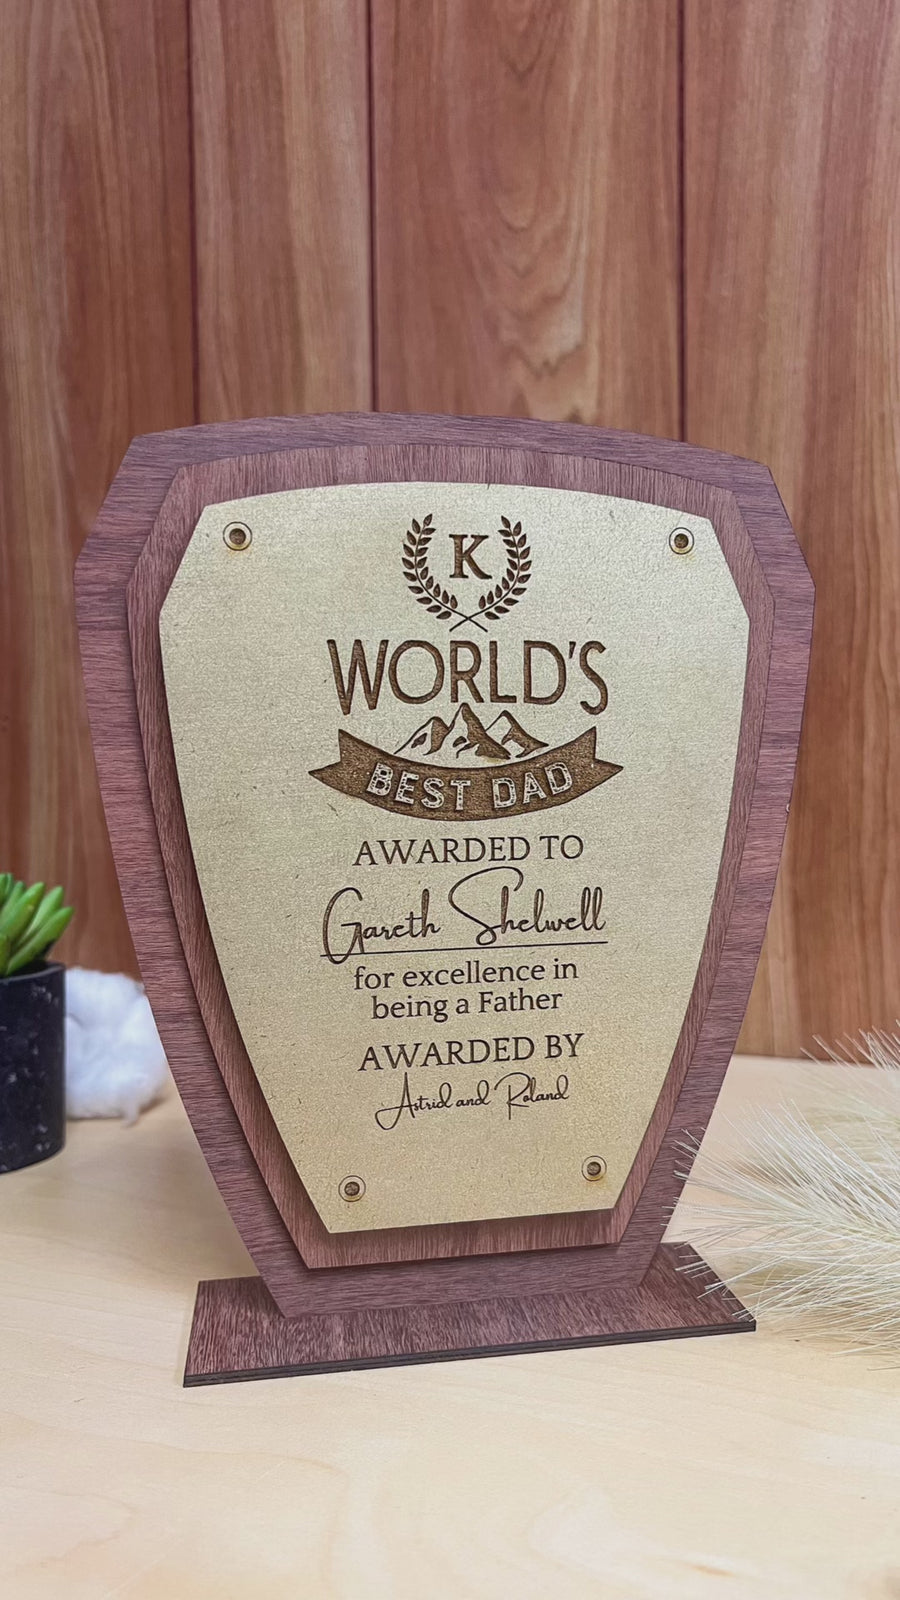 Personalised Triple Layers Number One Employee Wooden Trophy Award, Engraved World Greatest Staff of The Year Trophies, Custom Keepsake Gifts for #1 Best Dad, Student, Teacher, Coach